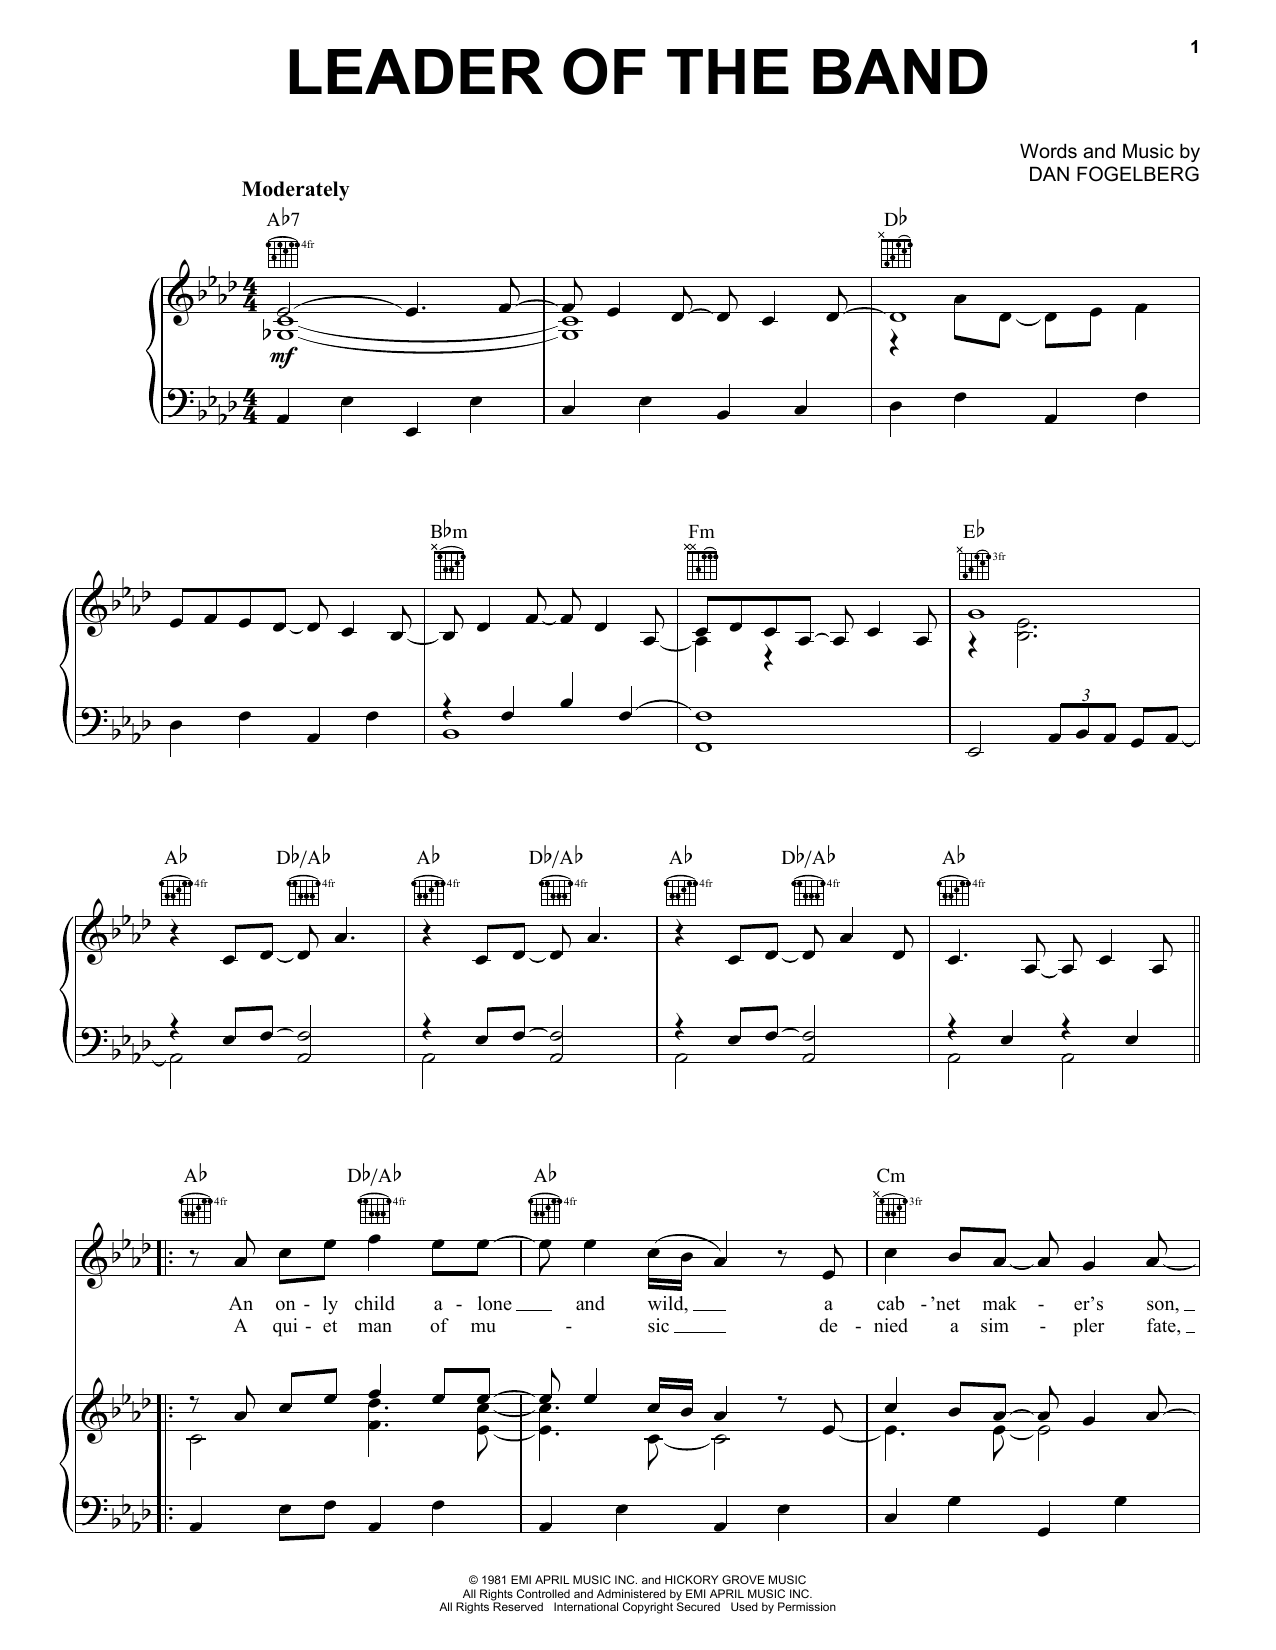 Download Dan Fogelberg Leader Of The Band sheet music notes and chords for Piano, Vocal & Guitar (Right-Hand Melody) - Download Printable PDF and start playing in minutes.